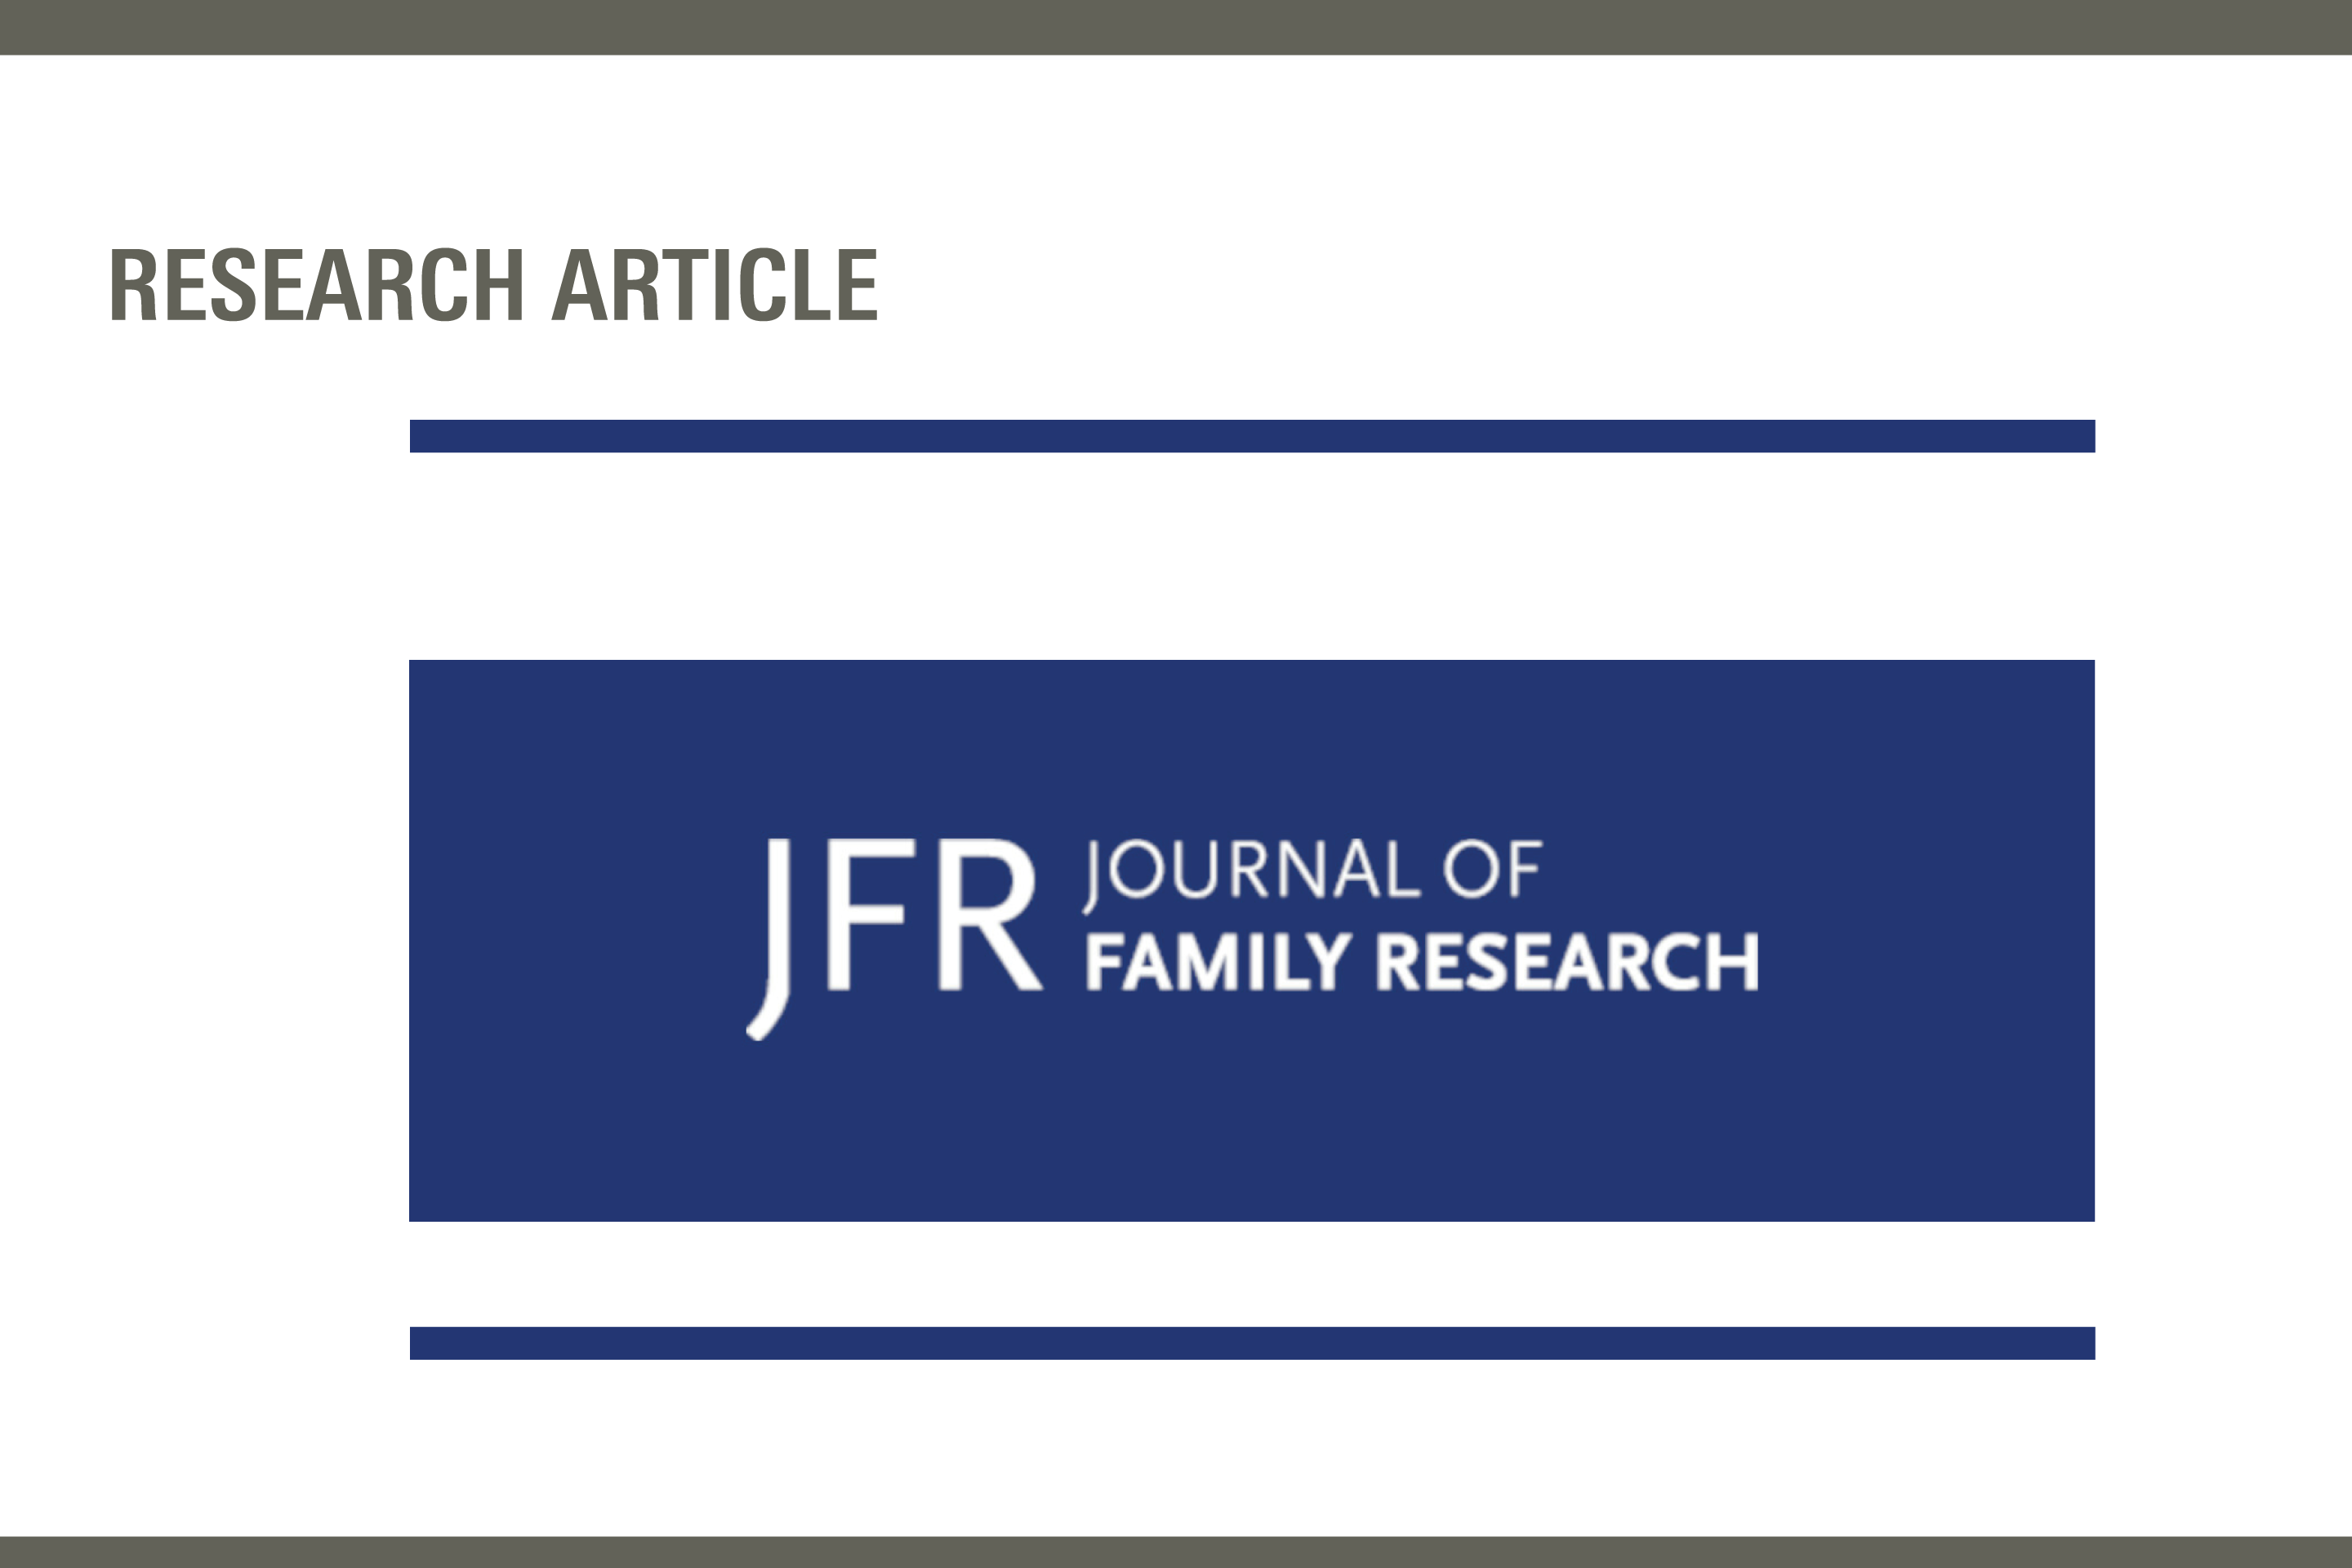 Journal of Family Research